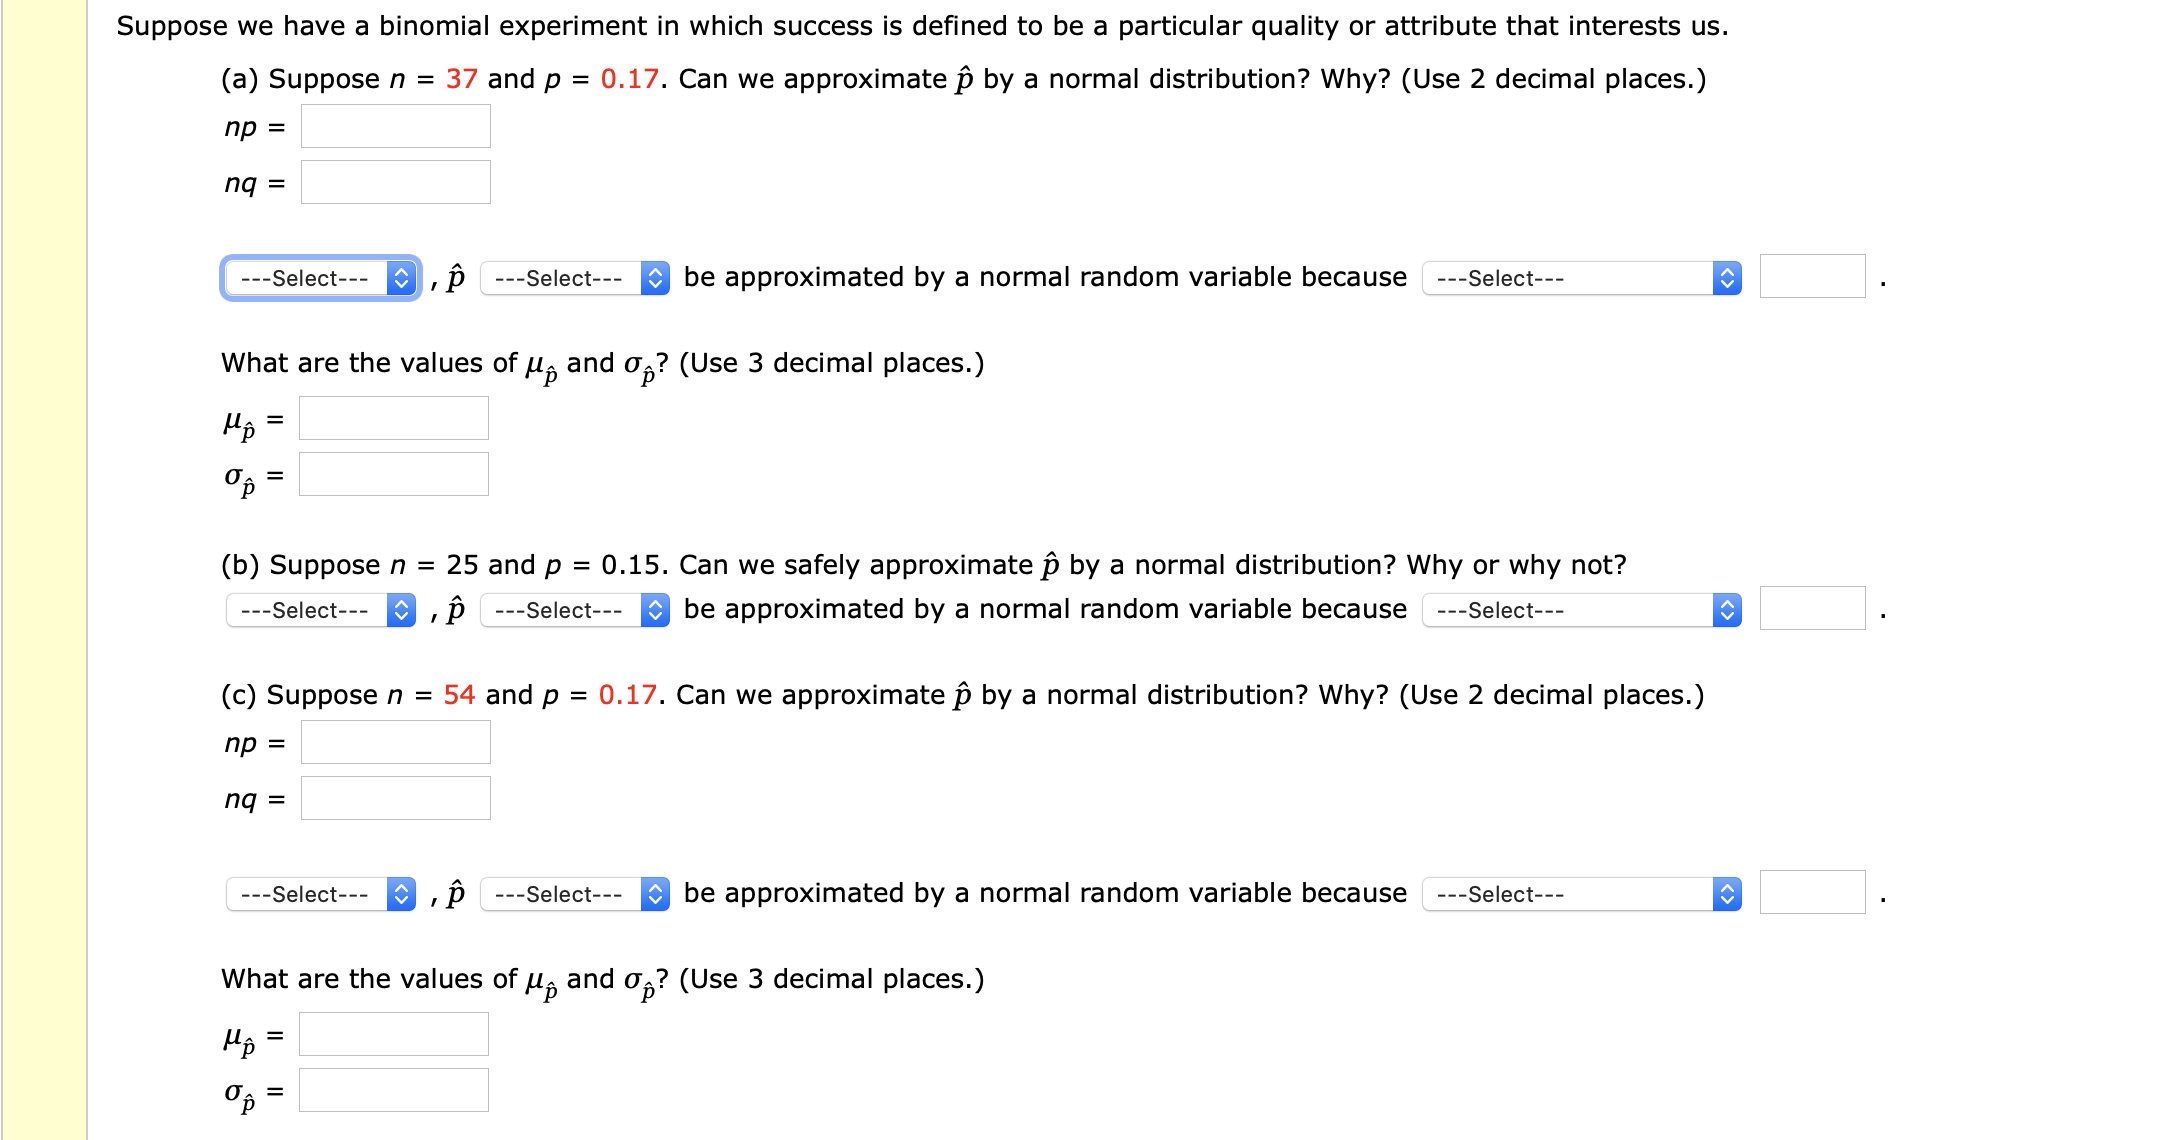 Suppose we have a binomial experiment in which success is defined to be a particular quality or attribute that interests us.
(a) Suppose n = 37 and p = 0.17. Can we approximate p by a normal distribution? Why? (Use 2 decimal places.)
пр —
O be approximated by a normal random variable because
---Select---
---Select---
---Select---
and o
0g? (Use 3 decimal places.)
What are the values of
Иp
(b) Suppose n = 25 and p = 0.15. Can we safely approximate p by a normal distribution? Why or why not?
O be approximated by a normal random variable because
---Select---
---Select---
---Select---
(c) Suppose n = 54 and p = 0.17. Can we approximate p by a normal distribution? Why? (Use 2 decimal places.)
пр 3
= bu
O be approximated by a normal random variable because
---Select---
---Select---
---Select---
What are the values of u, and o,? (Use 3 decimal places.)
<>
